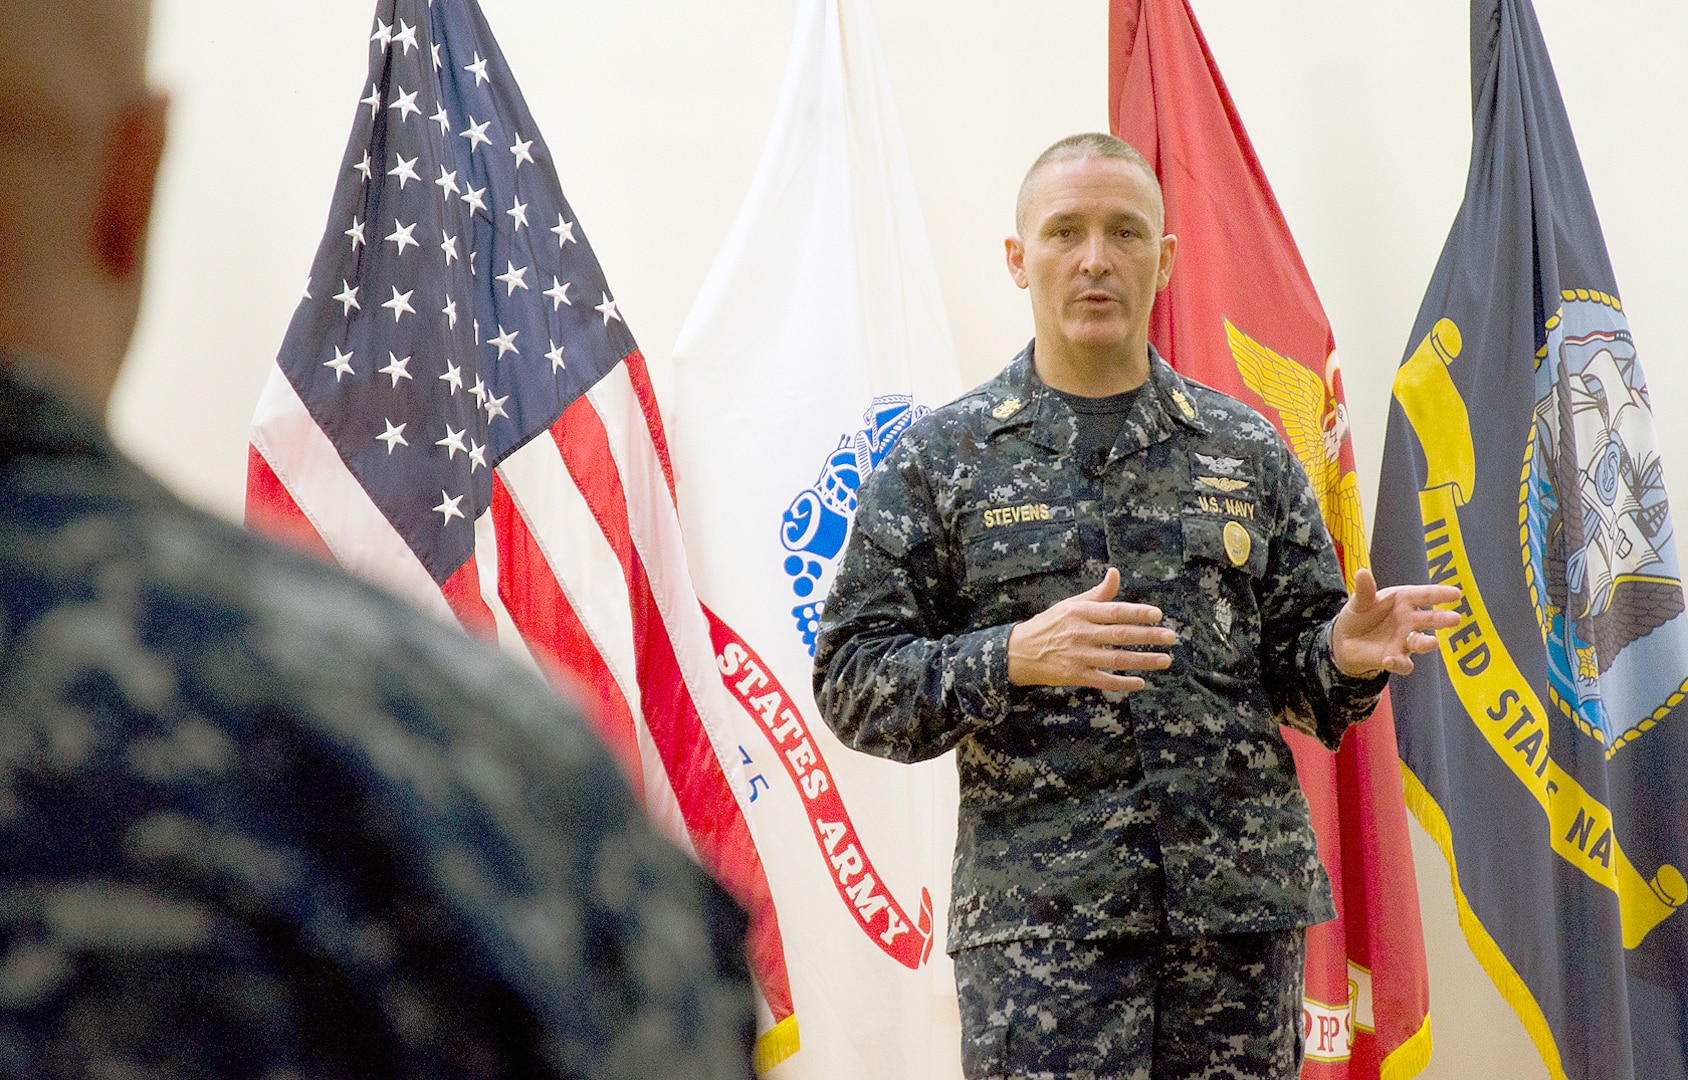 Master Chief Petty Officer of the Navy visits Sailors chiefs at JBSA